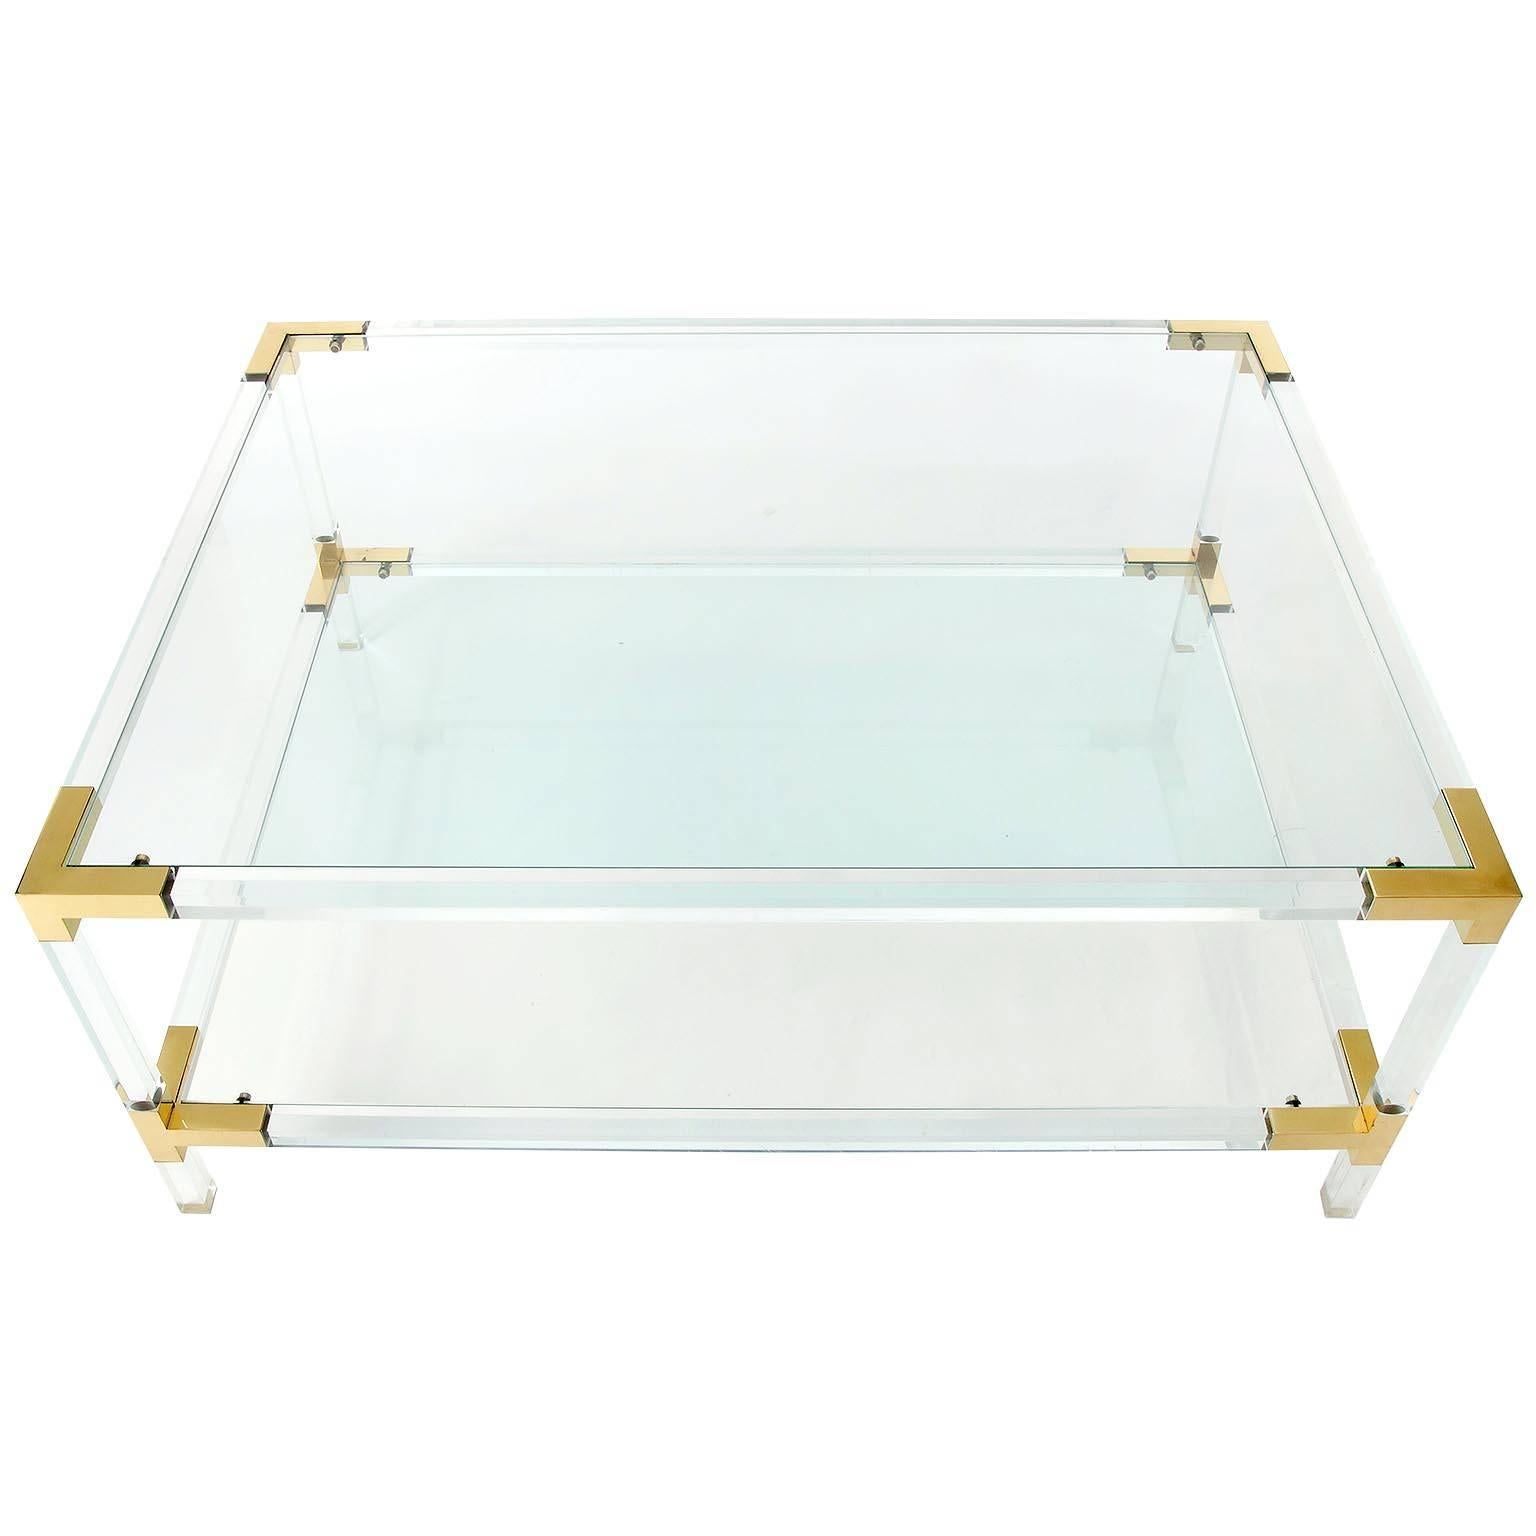 A large Italian Hollywood Regency coffee or cocktail table with two glass shelves attributed to Romeo Rega and in the Style of Charles Hollis or Maison Jansen, manufactured in Mid-Century in 1970s. The glasses are removable and the frame is made of